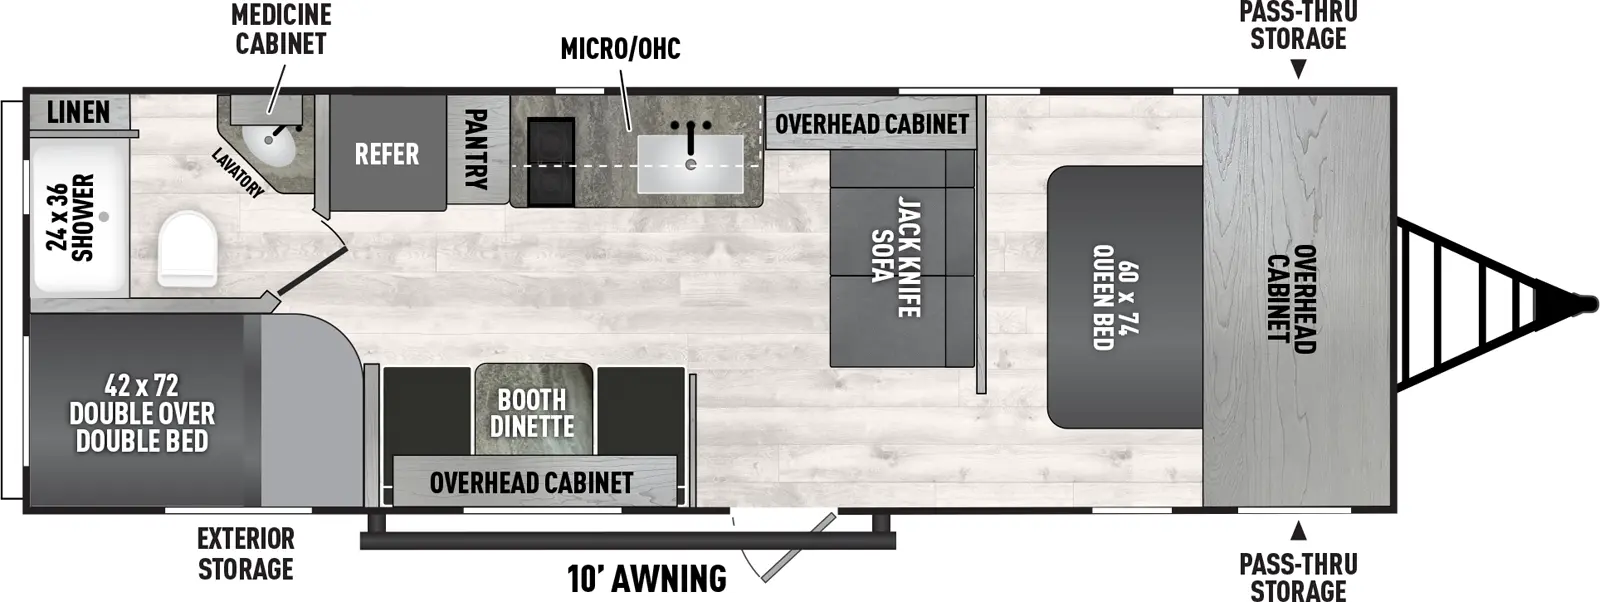 The 26BH has zero slideouts and one entry. Exterior features front pass-through storage, and 10 foot awning. Interior layout front to back: foot-facing queen bed with overhead cabinet; jacknife sofa along inner wall with off-door side overhead cabinet; door side entry, and booth dinette with overhead cabinet; off-door side kitchen counter with sink and cooktop, overhead cabinet and microwave, pantry and refrigerator; rear off-door side full bathroom with linen closet and medicine cabinet; rear door side double over double bed.